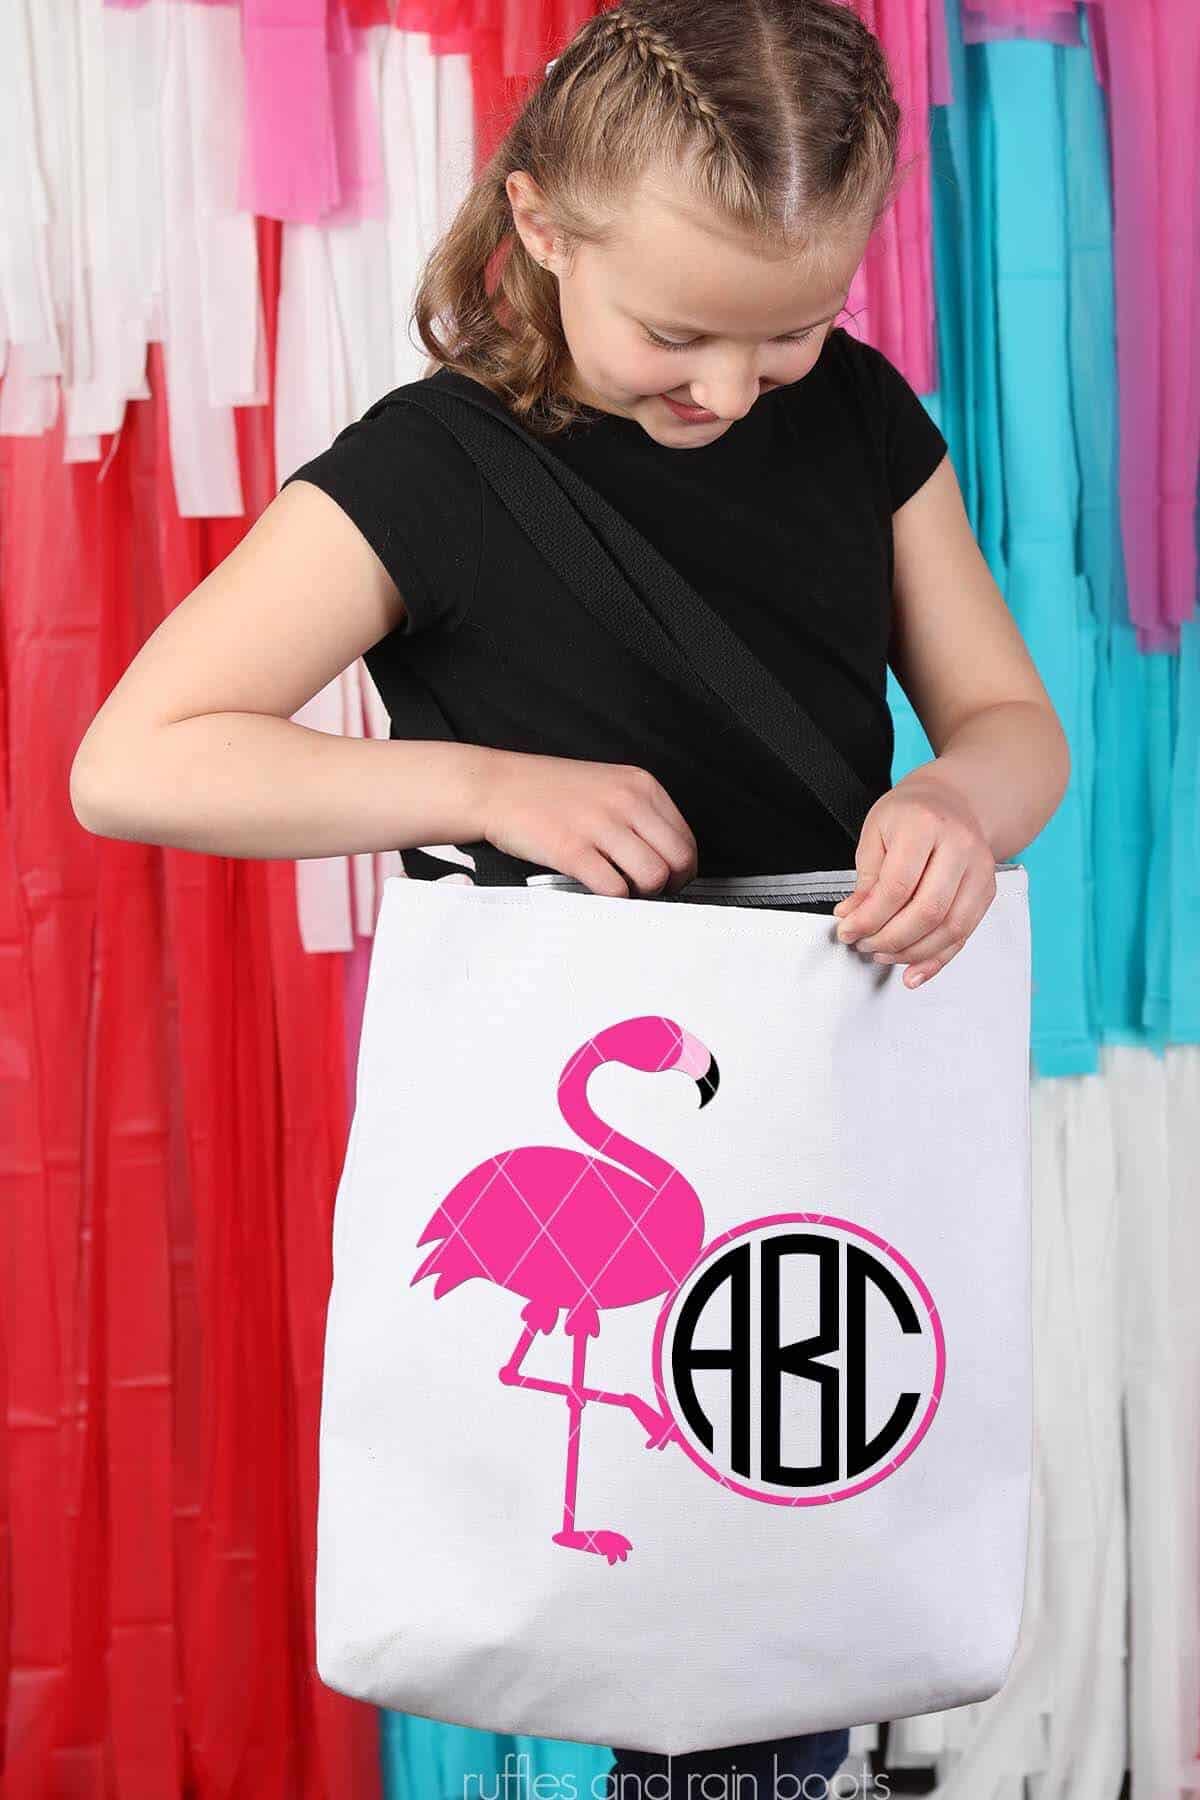 Vertical image of a pink flamingo monogram SVG on a canvas tote bag on the shoulder of a young girl in a black t shirt standing in front of a red and teal party back drop.